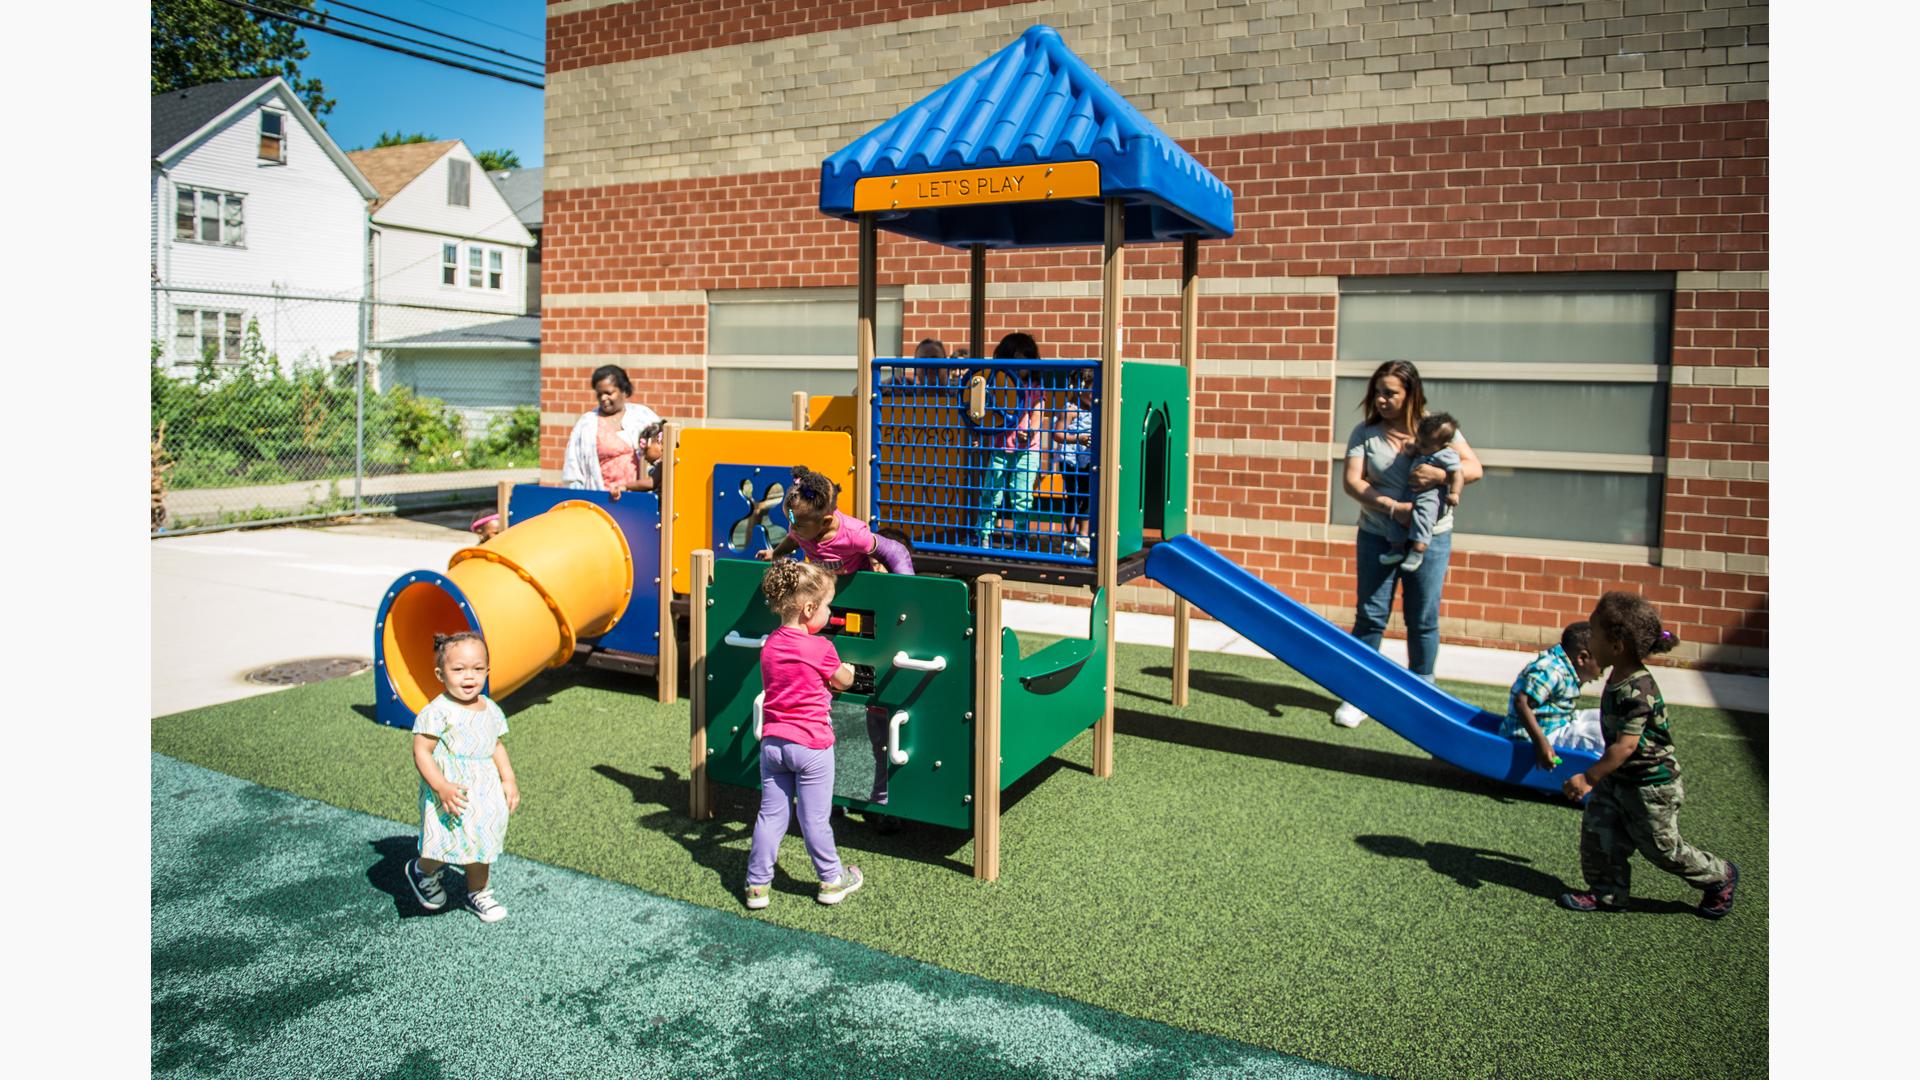 Children play all over a toddler accessible play structure with play panels, slides, and climbers all next to a brick building.